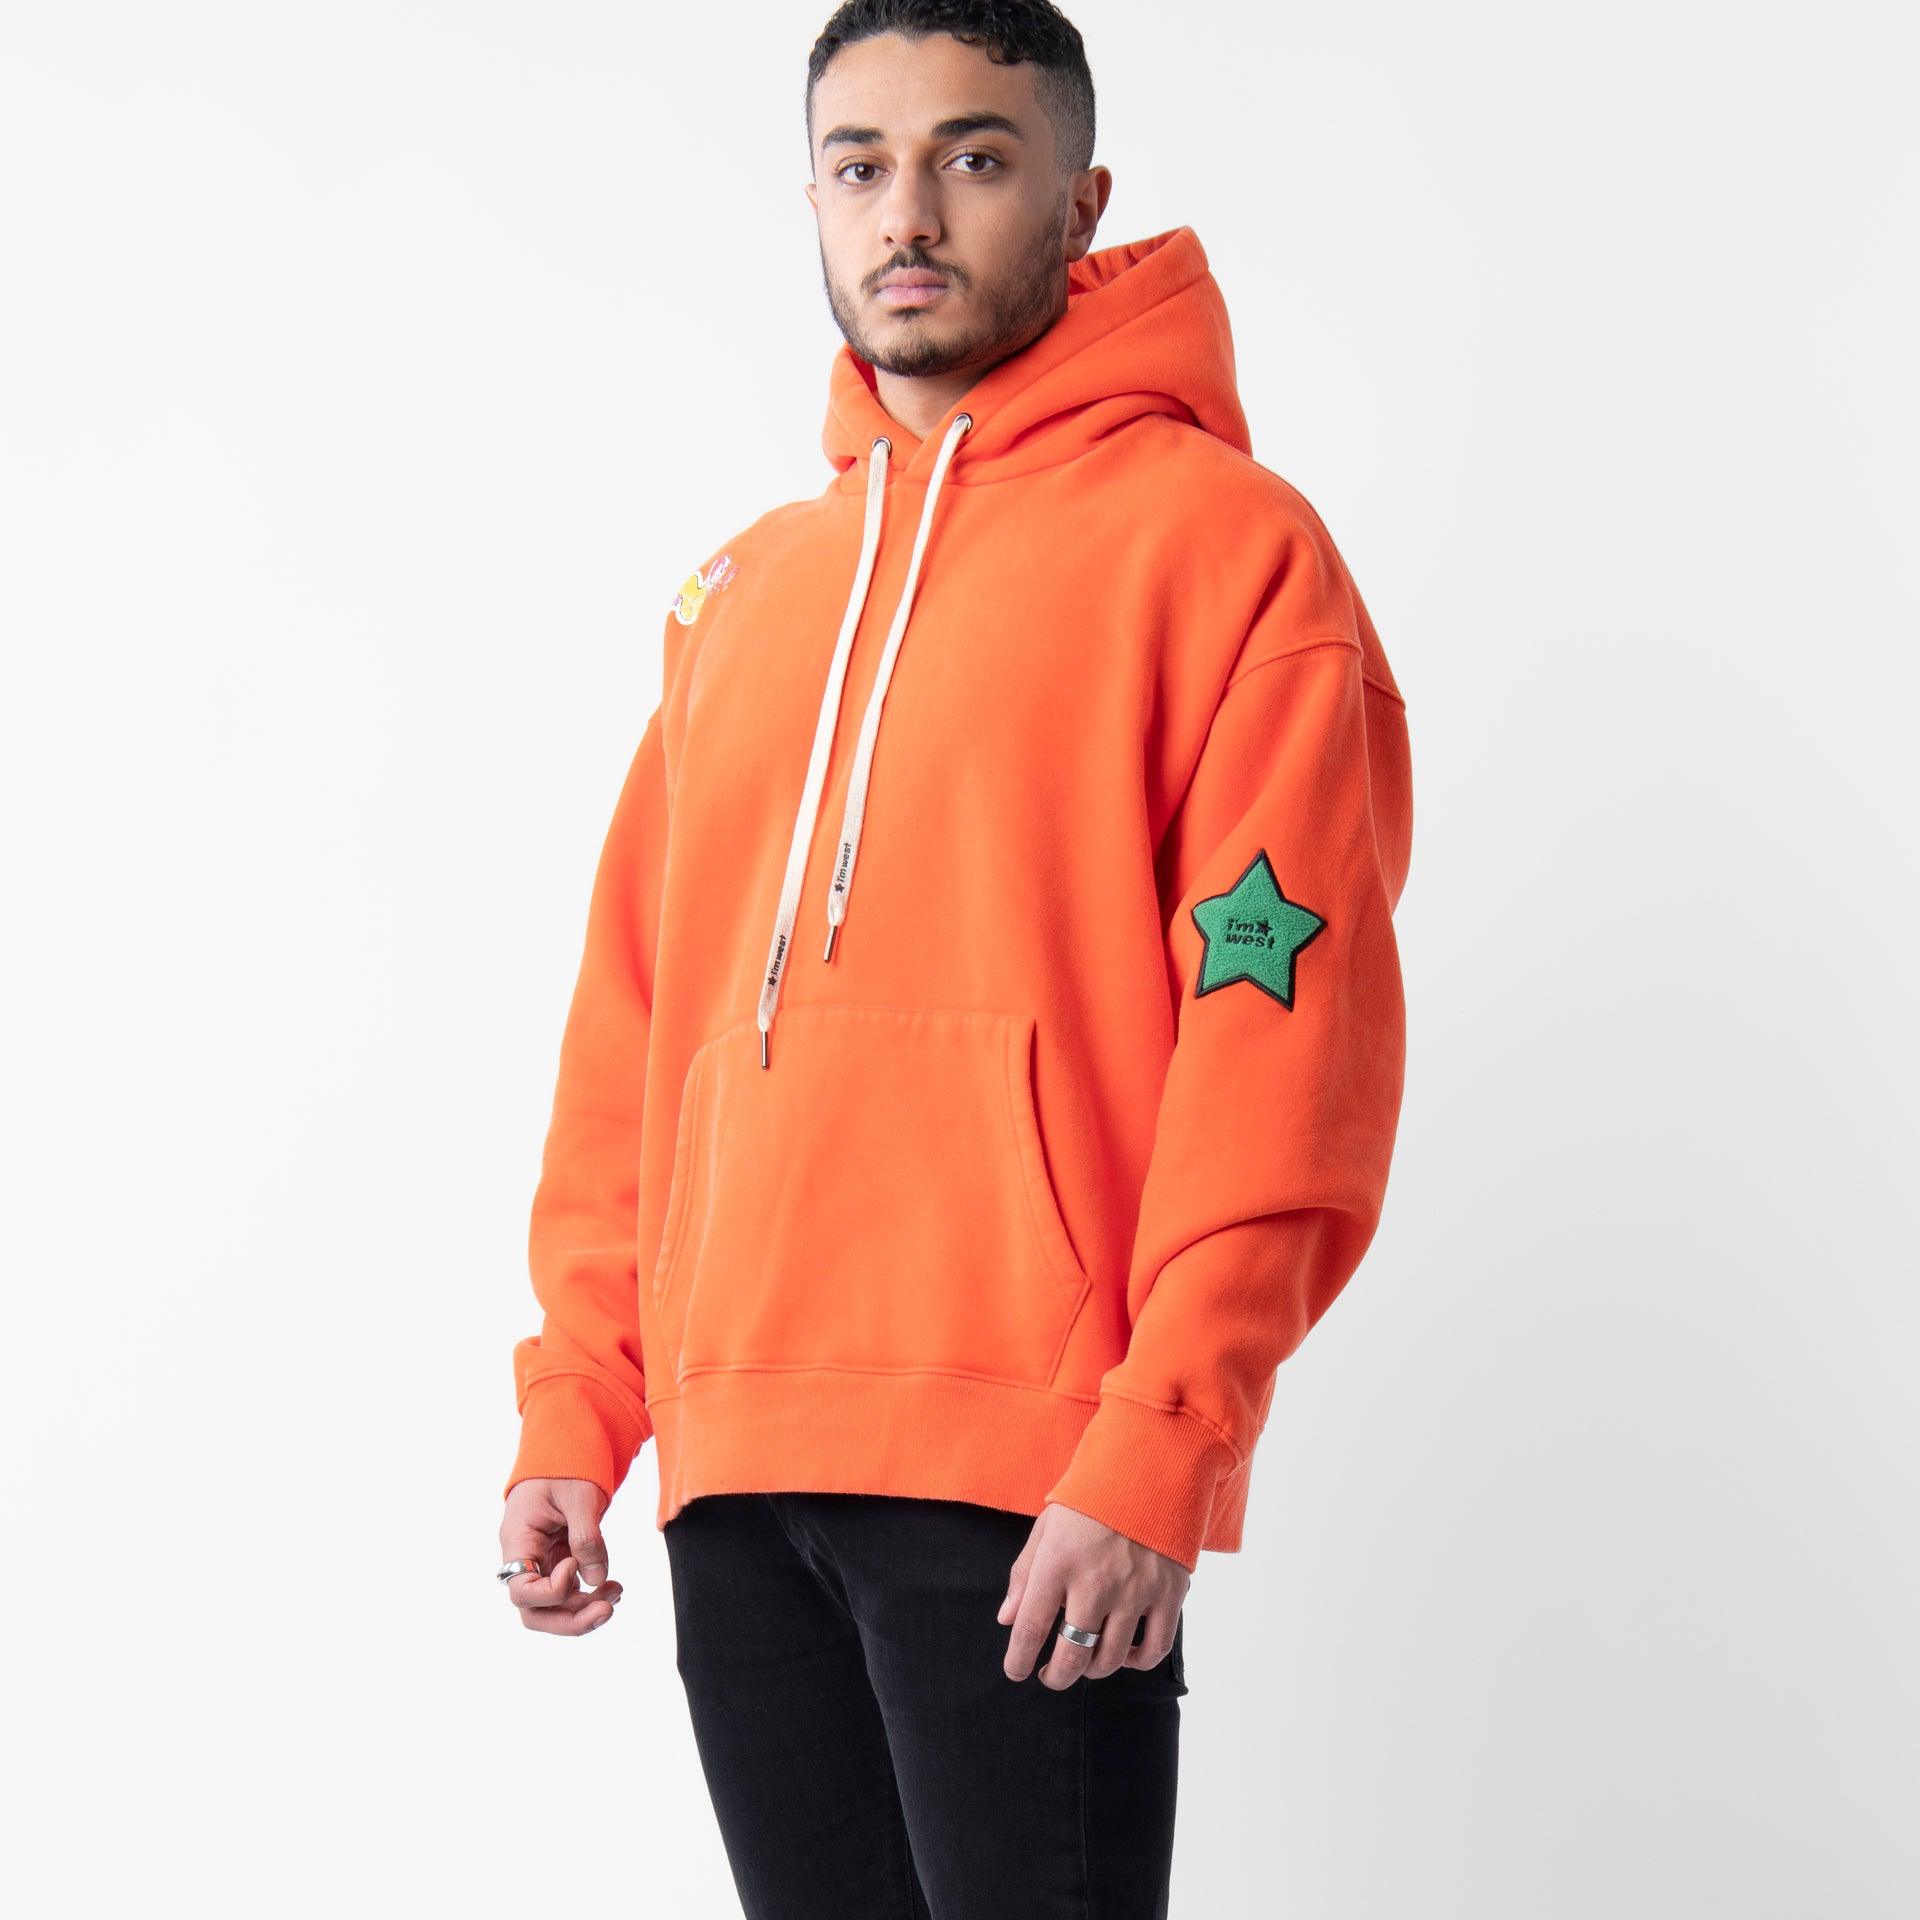 Orange Classic Hoodie From I'm West - WECRE8